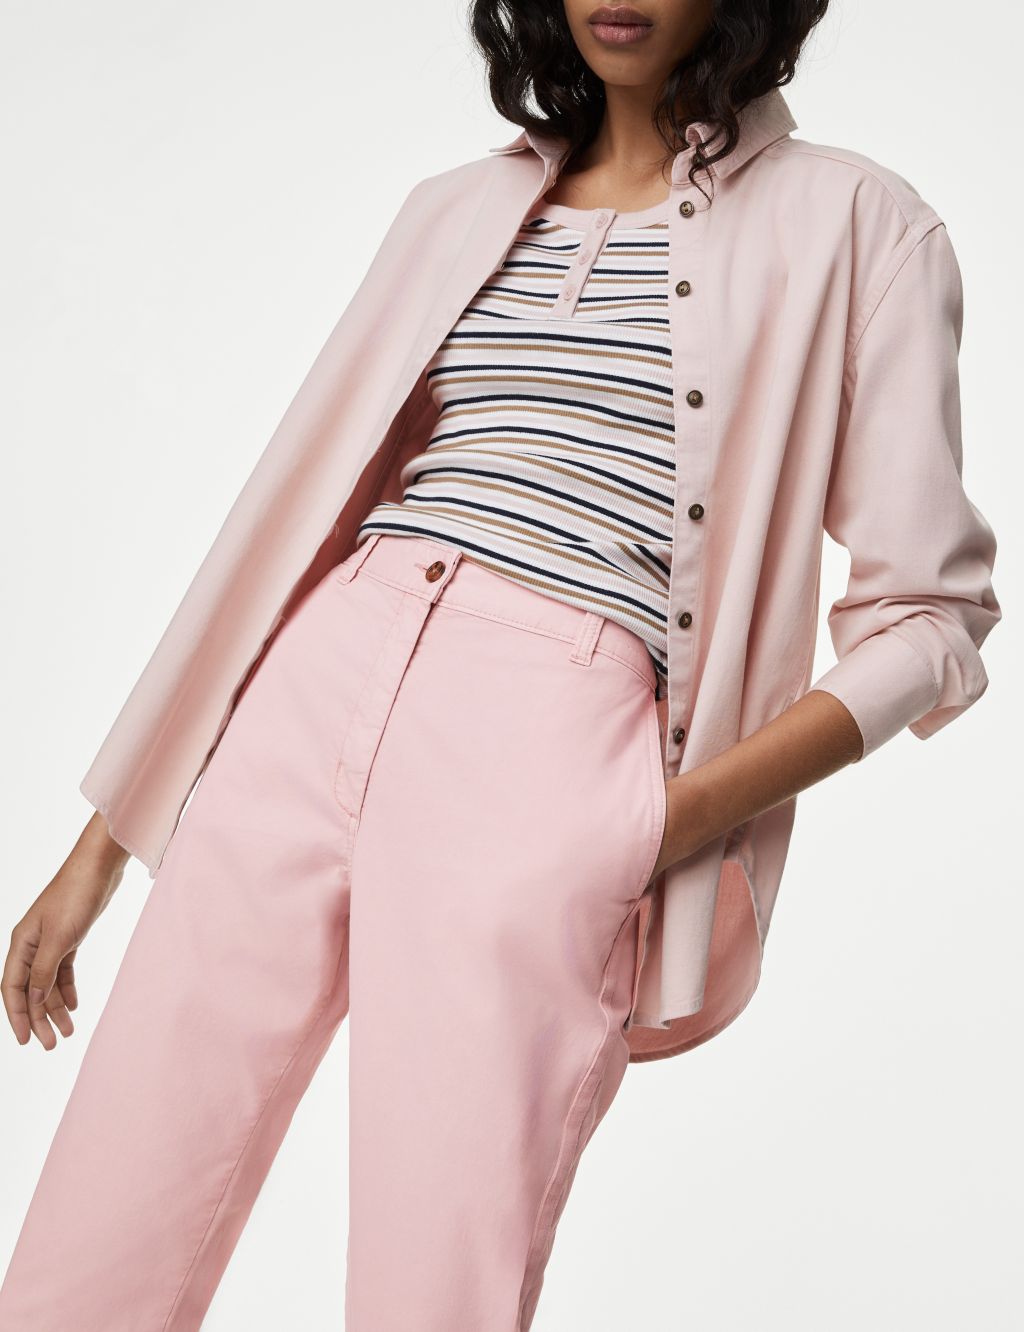 Women's Pink Trousers, Slim & Straight Fit Trousers